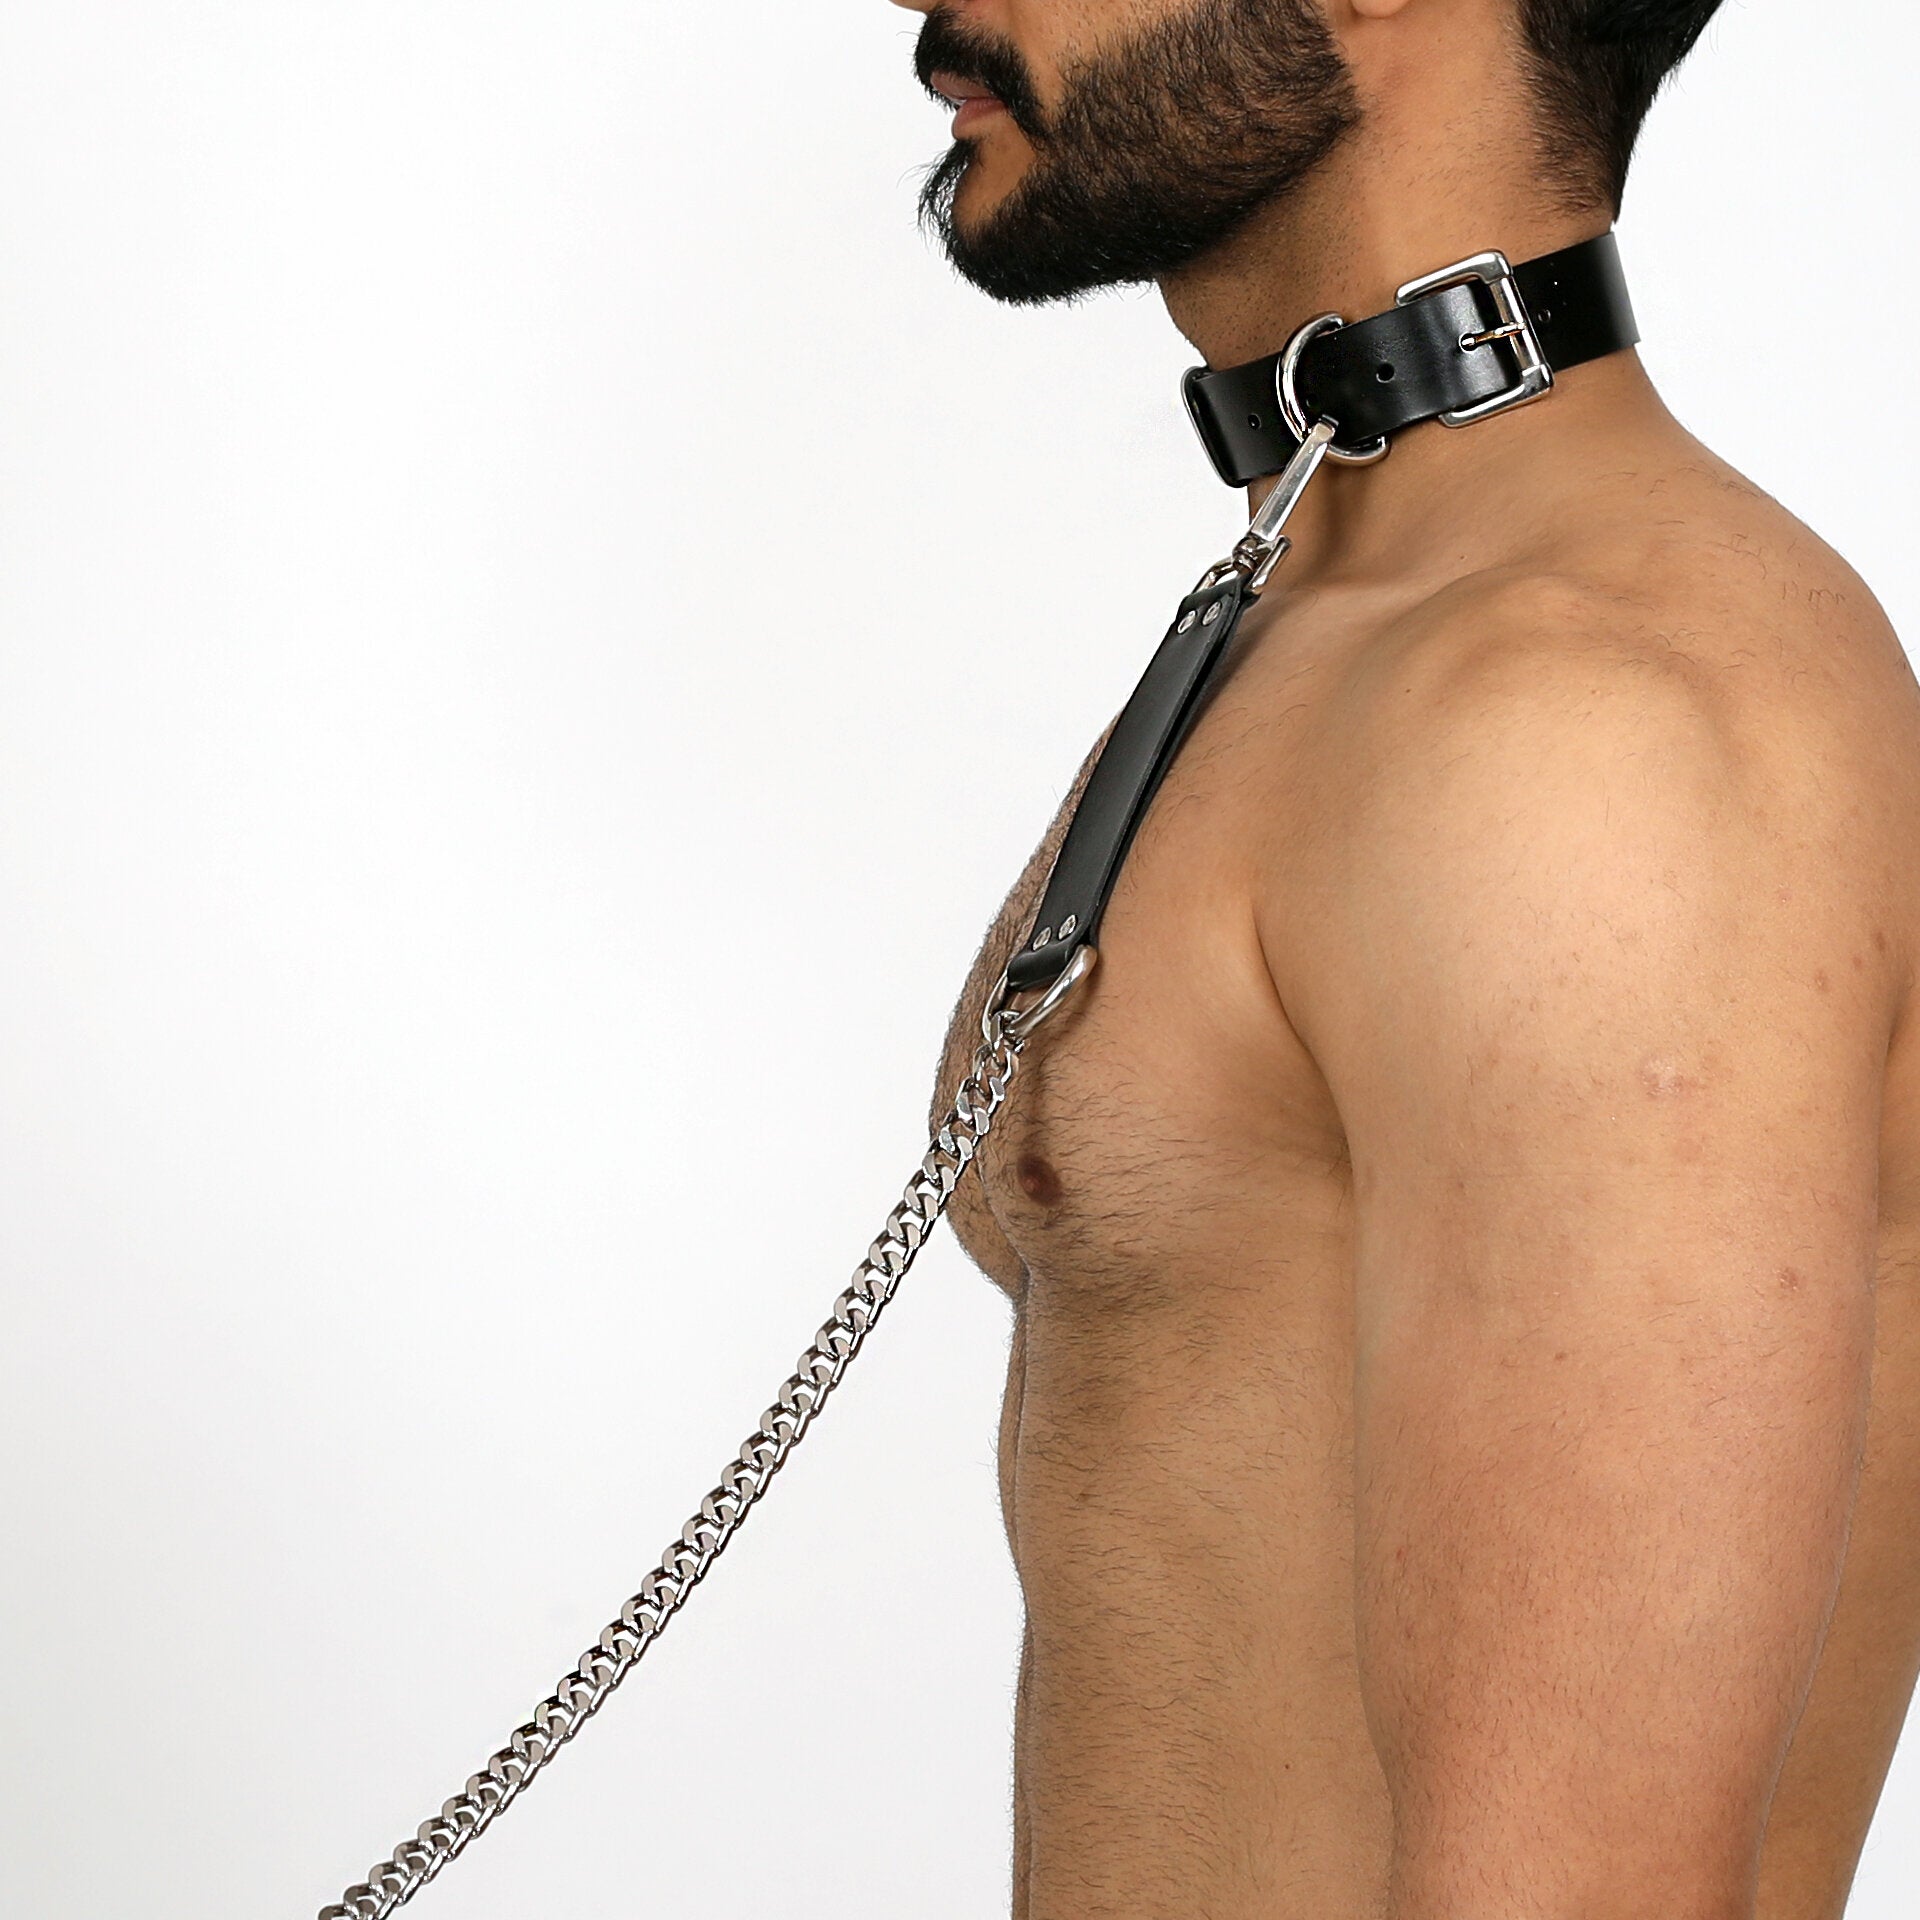 SUBMISSIVE COLLAR AND LEASH - Subculture